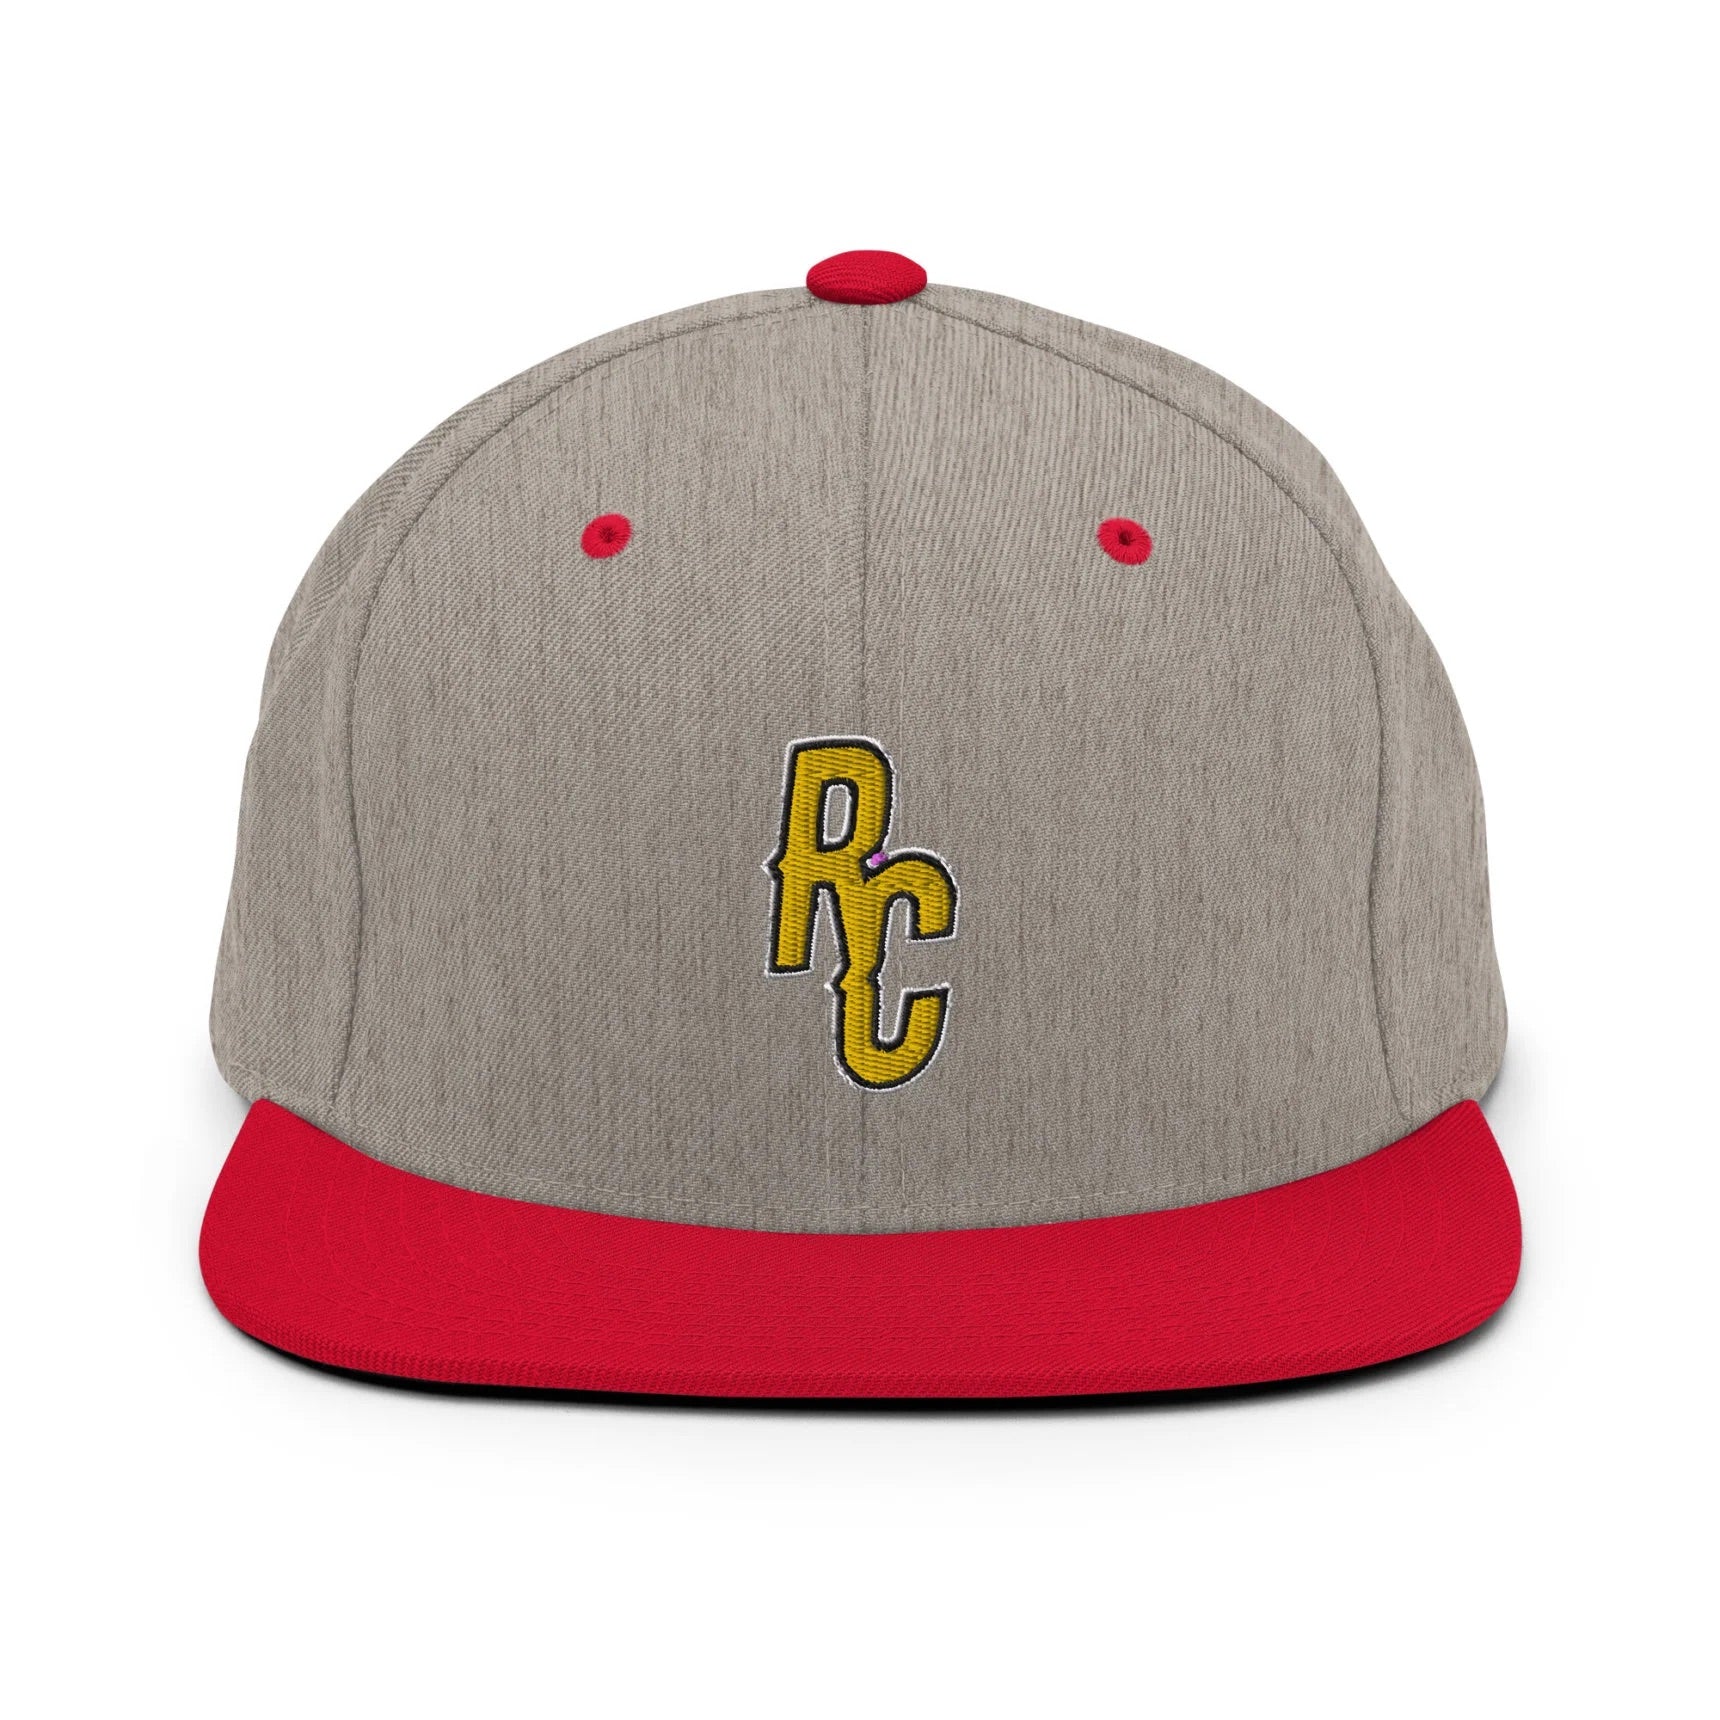 Ray Cheesy ShowZone snapback hat in heather grey with red brim and accents